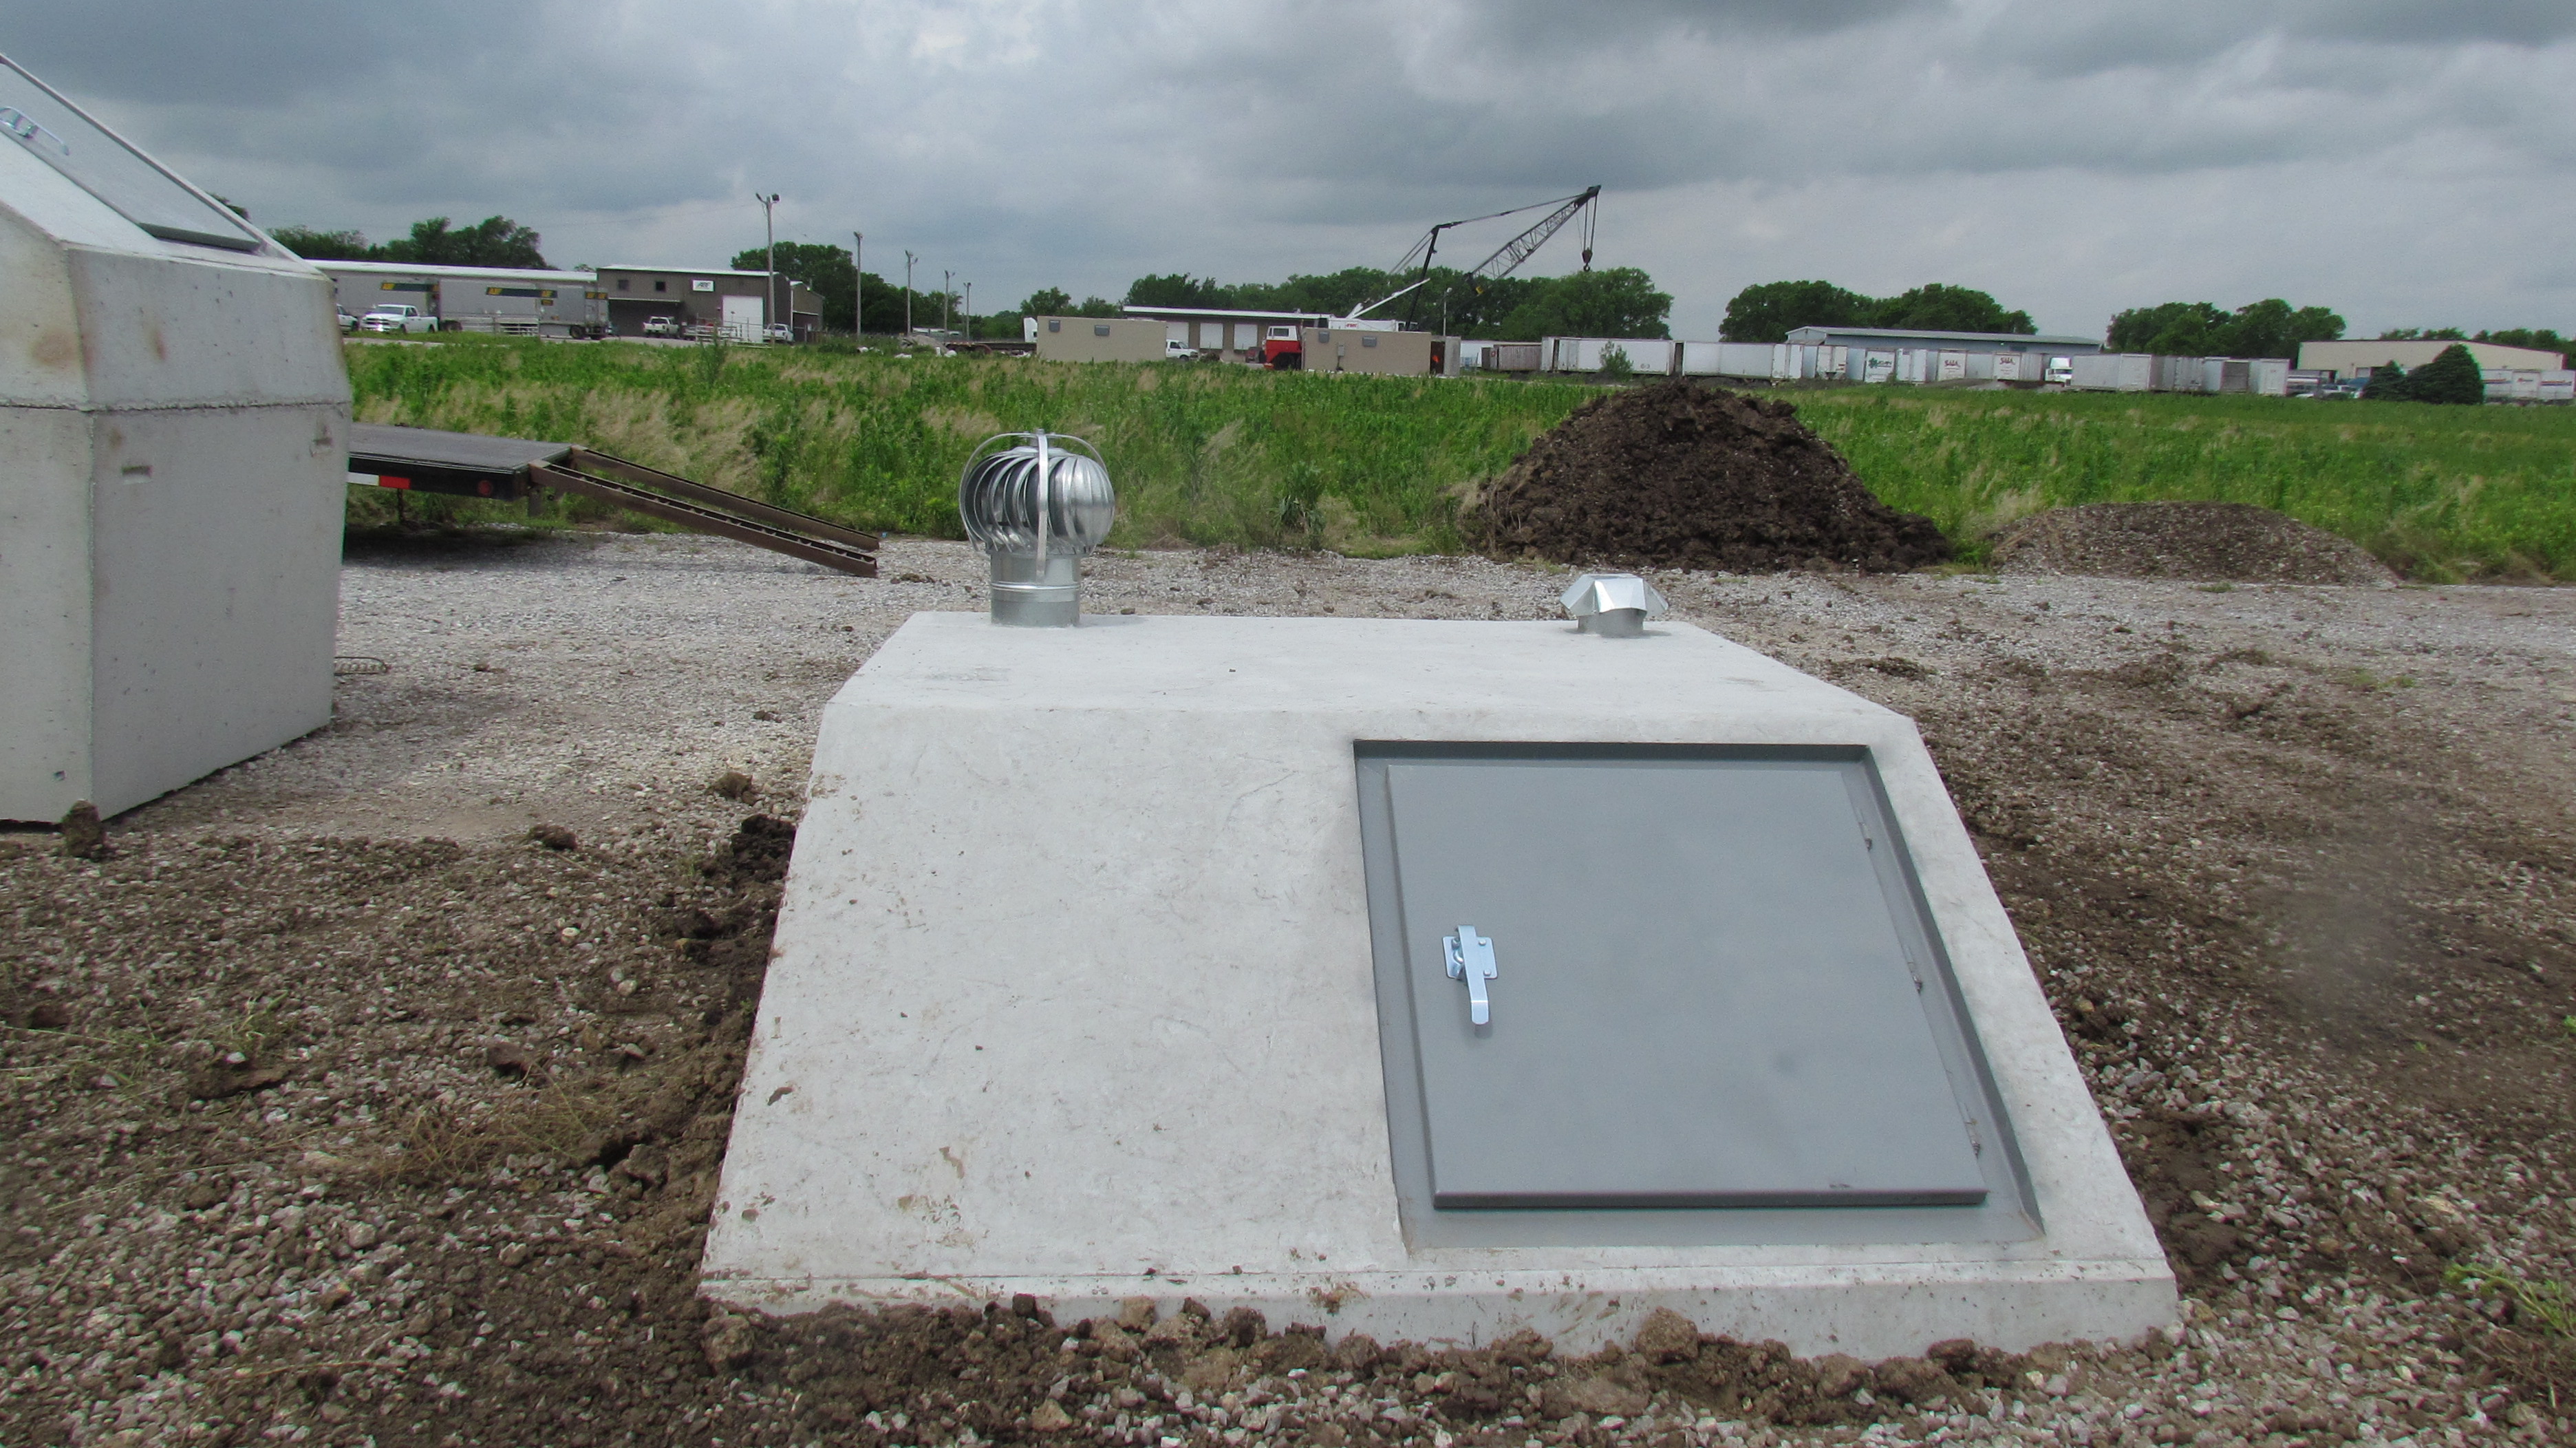 in ground 6x8 metal storm shelter